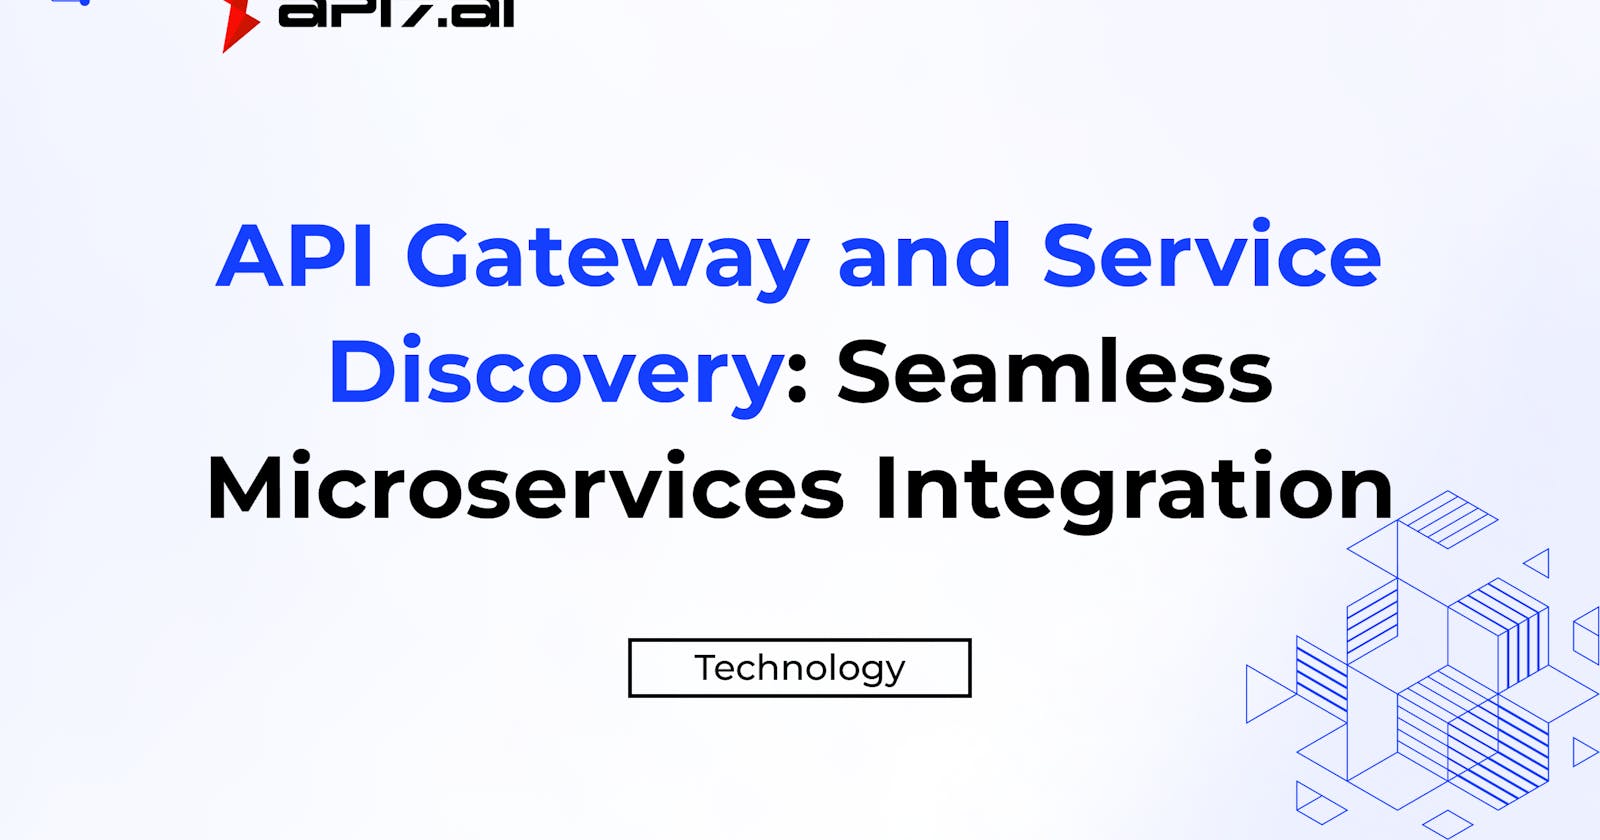 API Gateway and Service Discovery: Seamless Microservices Integration